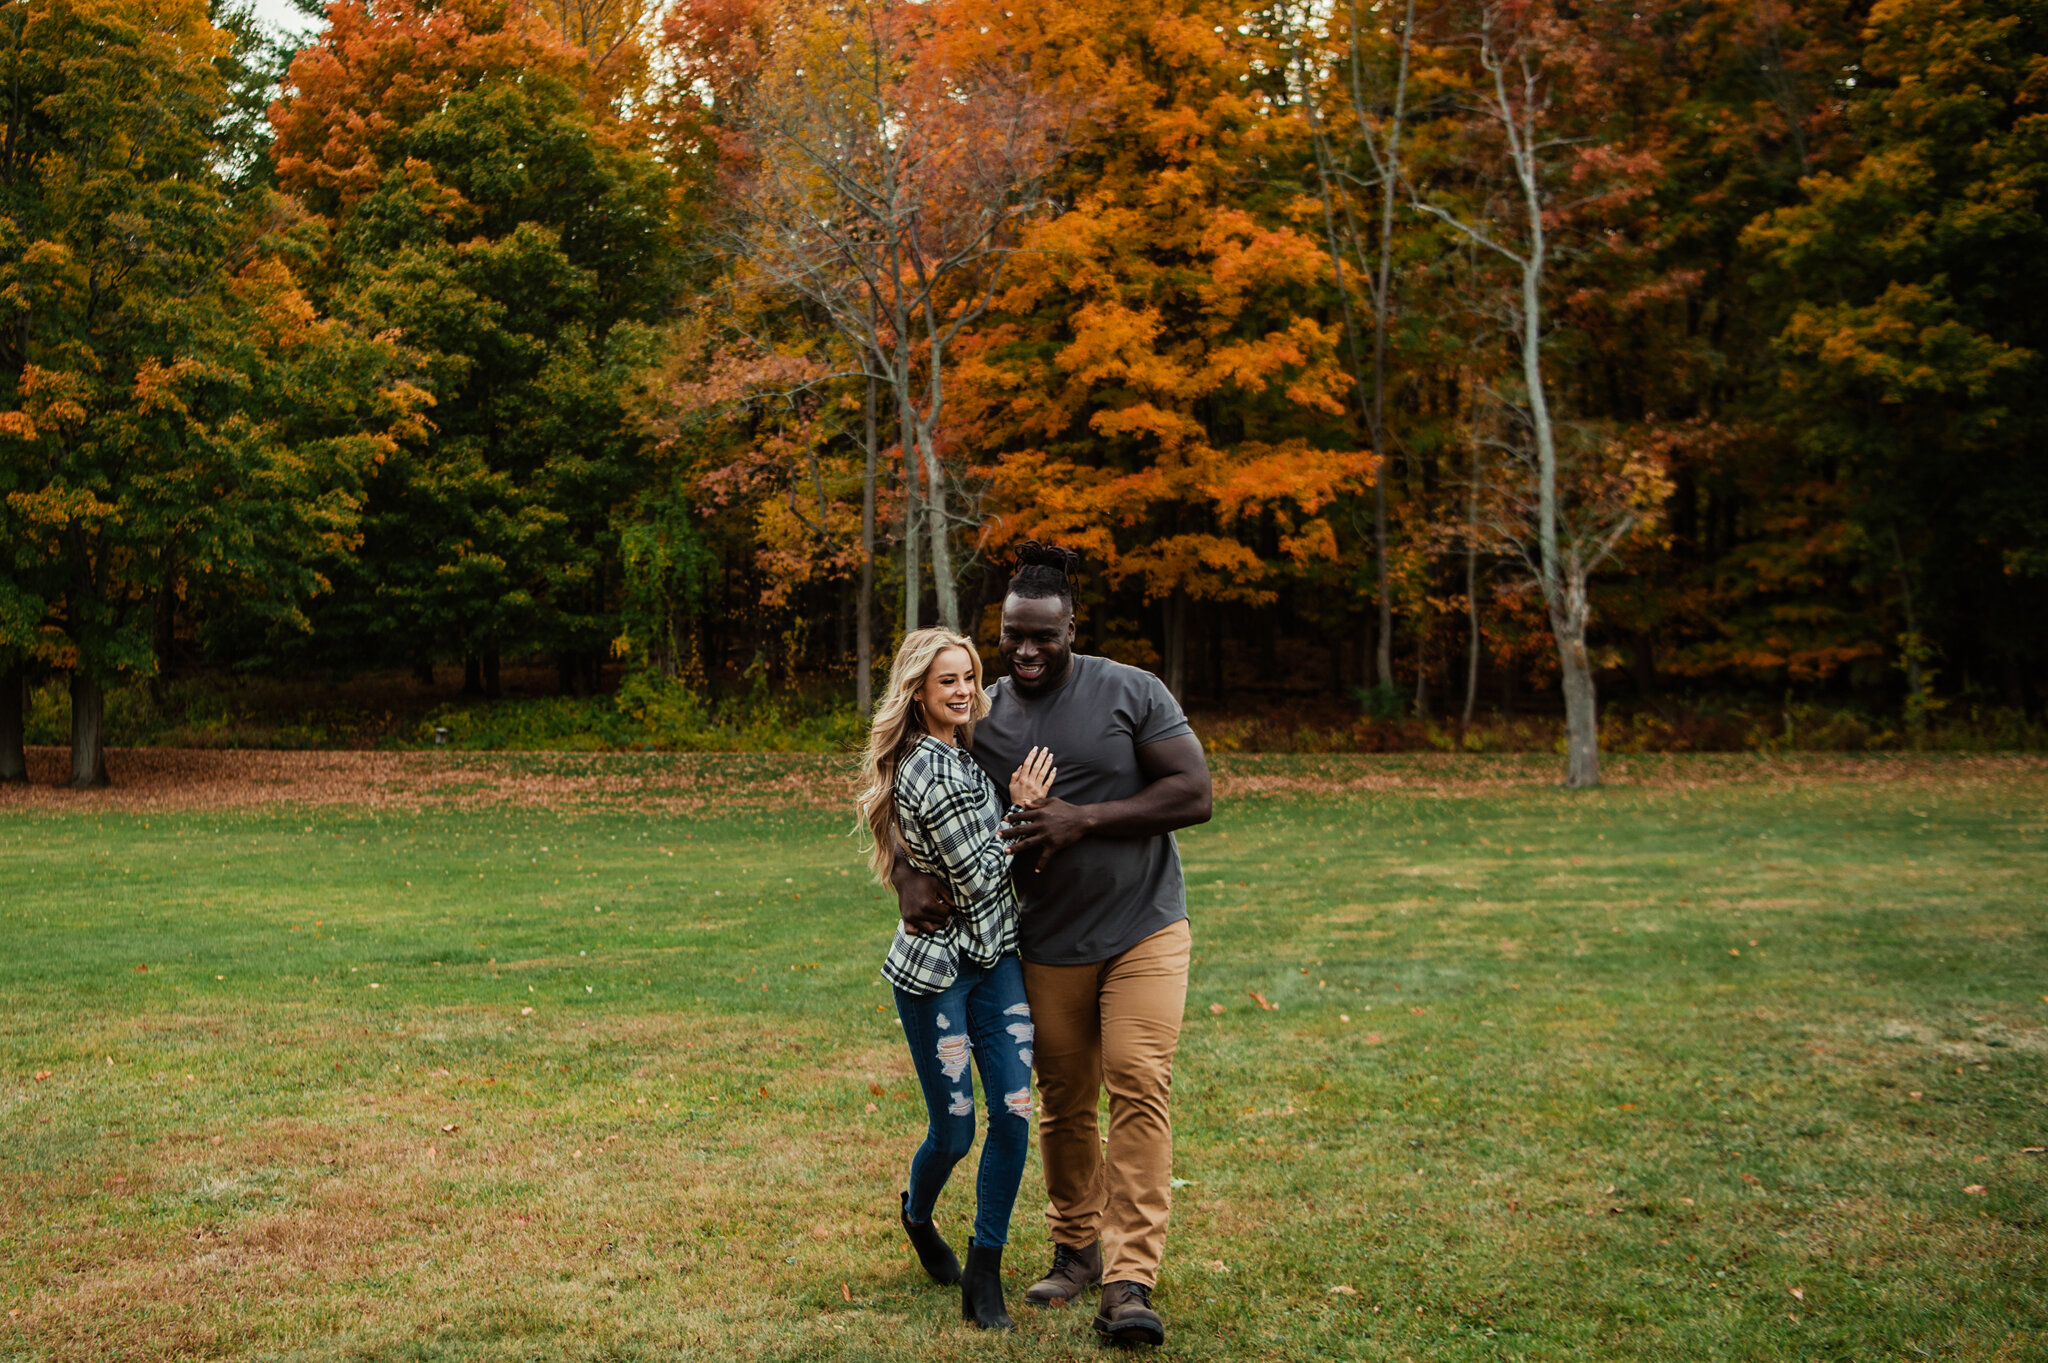 Letchworth_State_Park_Rochester_Couples_Session_JILL_STUDIO_Rochester_NY_Photographer_9585.jpg